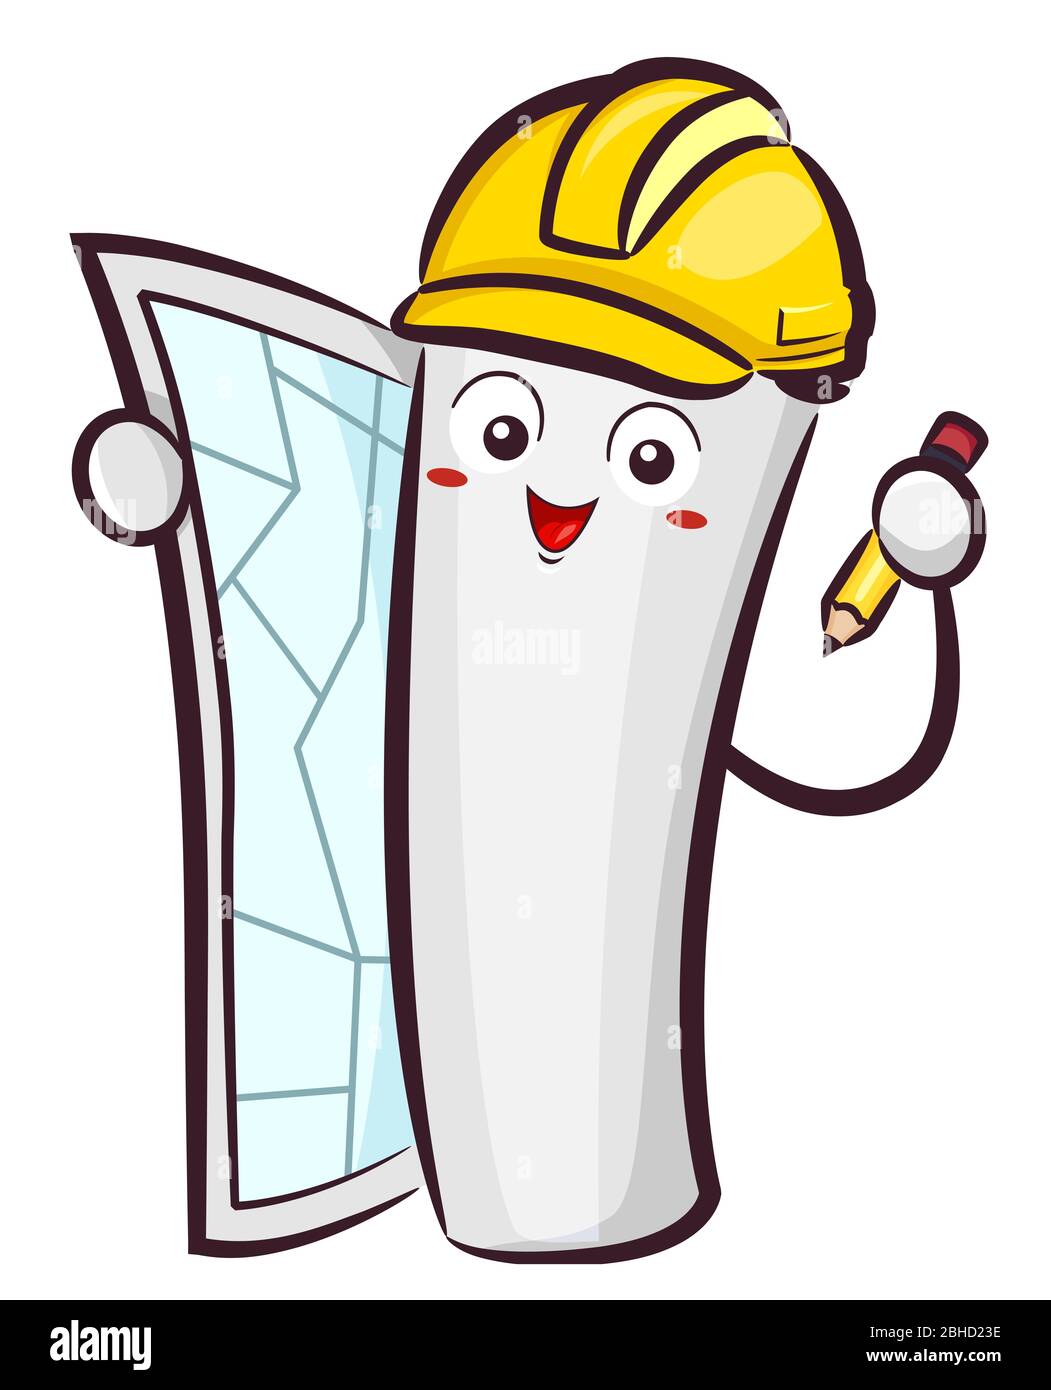 Illustration of a Construction Blueprint Mascot Holding a Pencil and Wearing a Yellow Hard Hat Stock Photo